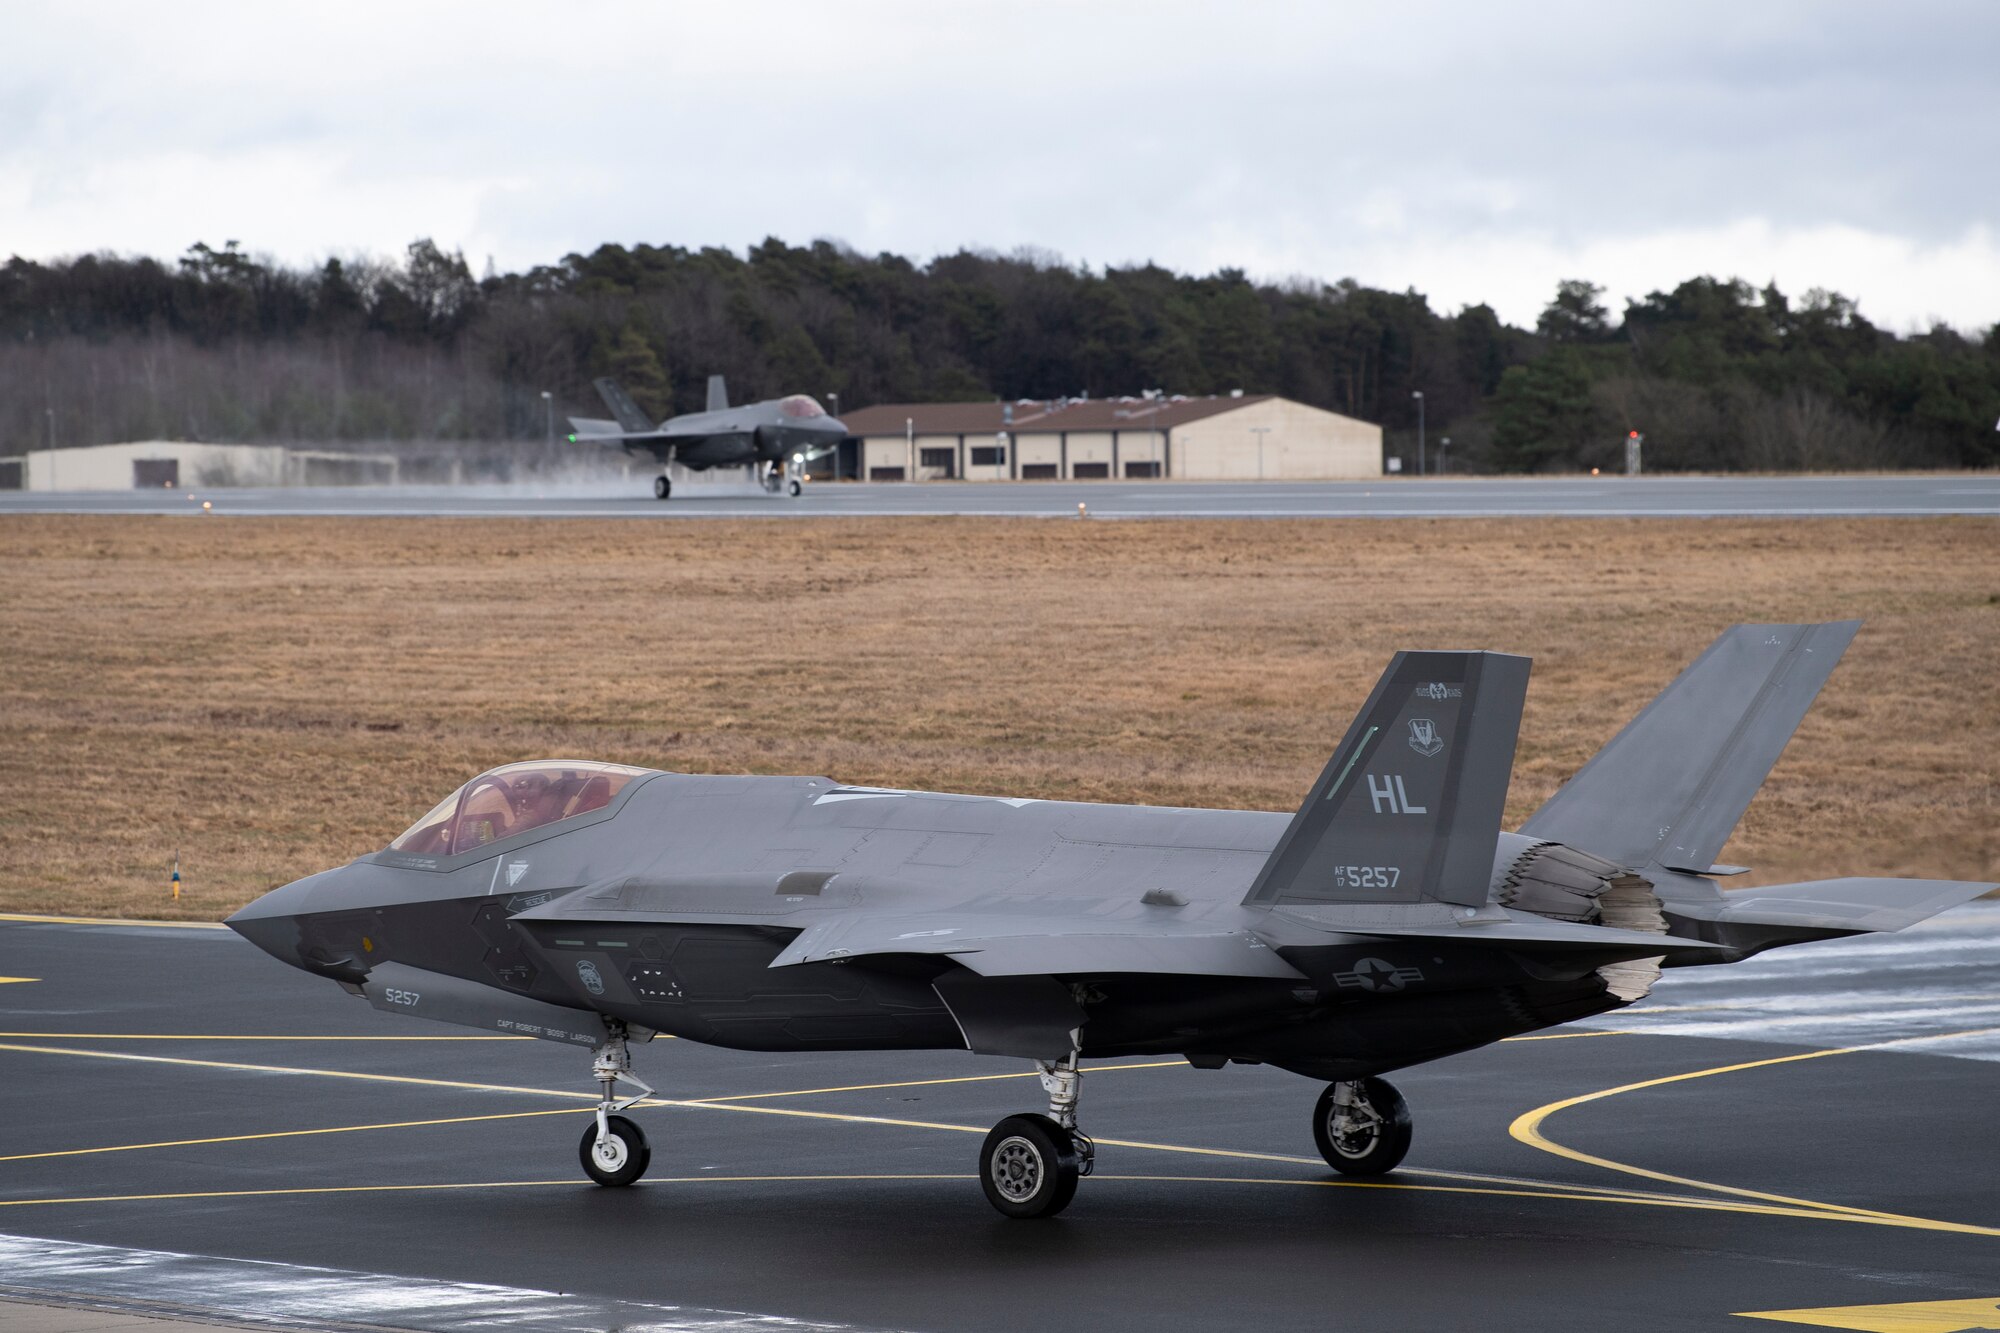 Two U.S. Air Force F-35A Lightning II multirole fighter jets from the 34th Fighter Squadron, 388th Fighter Wing, taxi on the flightline after arriving at Spangdahlem Air Base, Germany, Feb. 16, 2022, to bolster readiness and enhance capabilities with regional partners and allies.